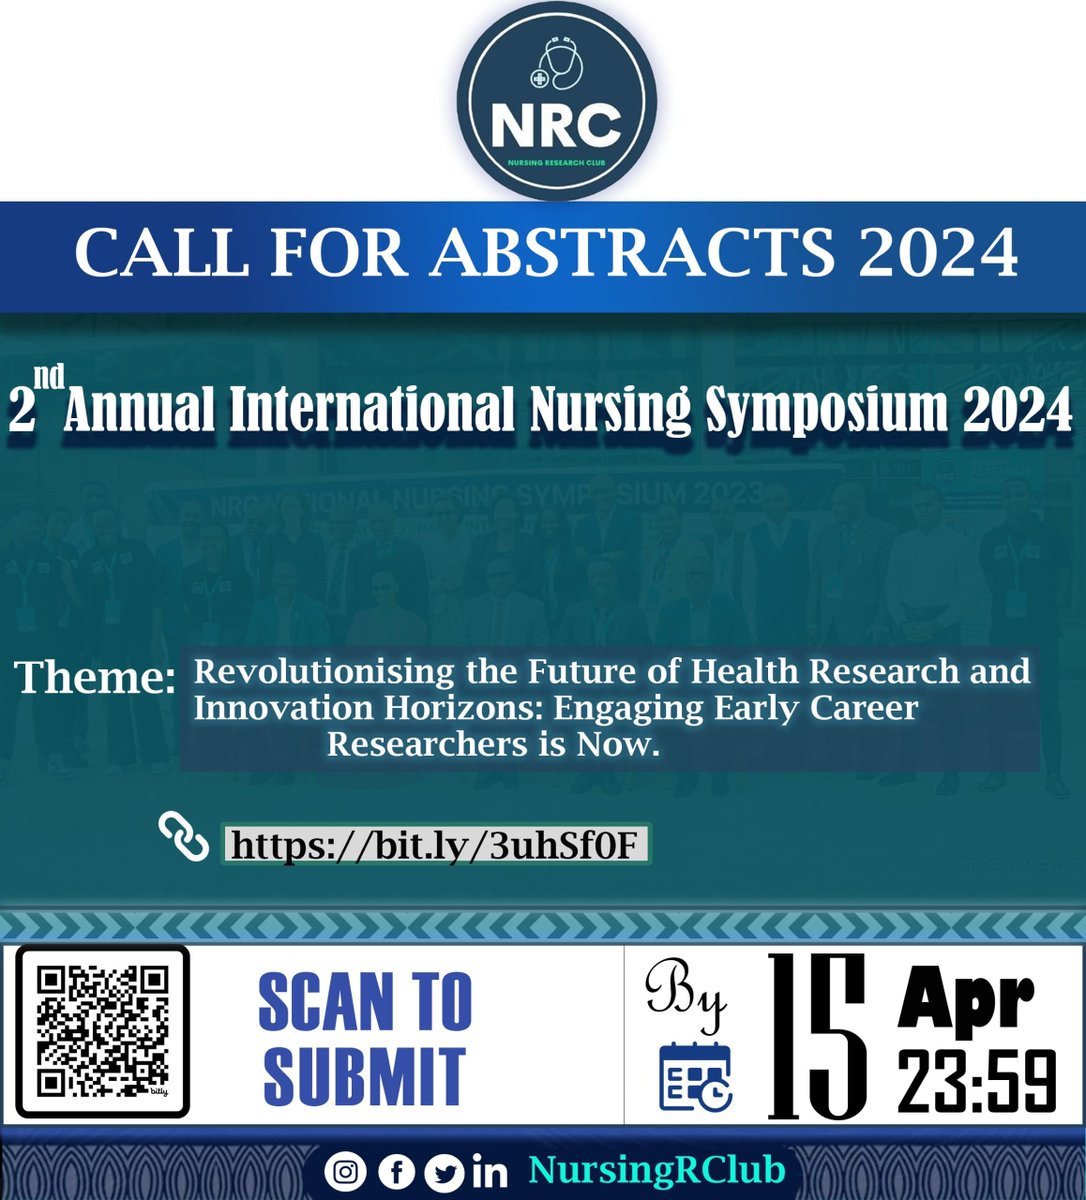 📢📢Calling all early career researchers!!! @Uni_Rwanda & @UCmhs, via @NursingRClub, invite you to submit abstracts on various health topics for the 2nd Annual International Nursing Symposium 2024. Don't miss this chance! Submit ↘️ docs.google.com/forms/d/e/1FAI… #NRCSymposium2024